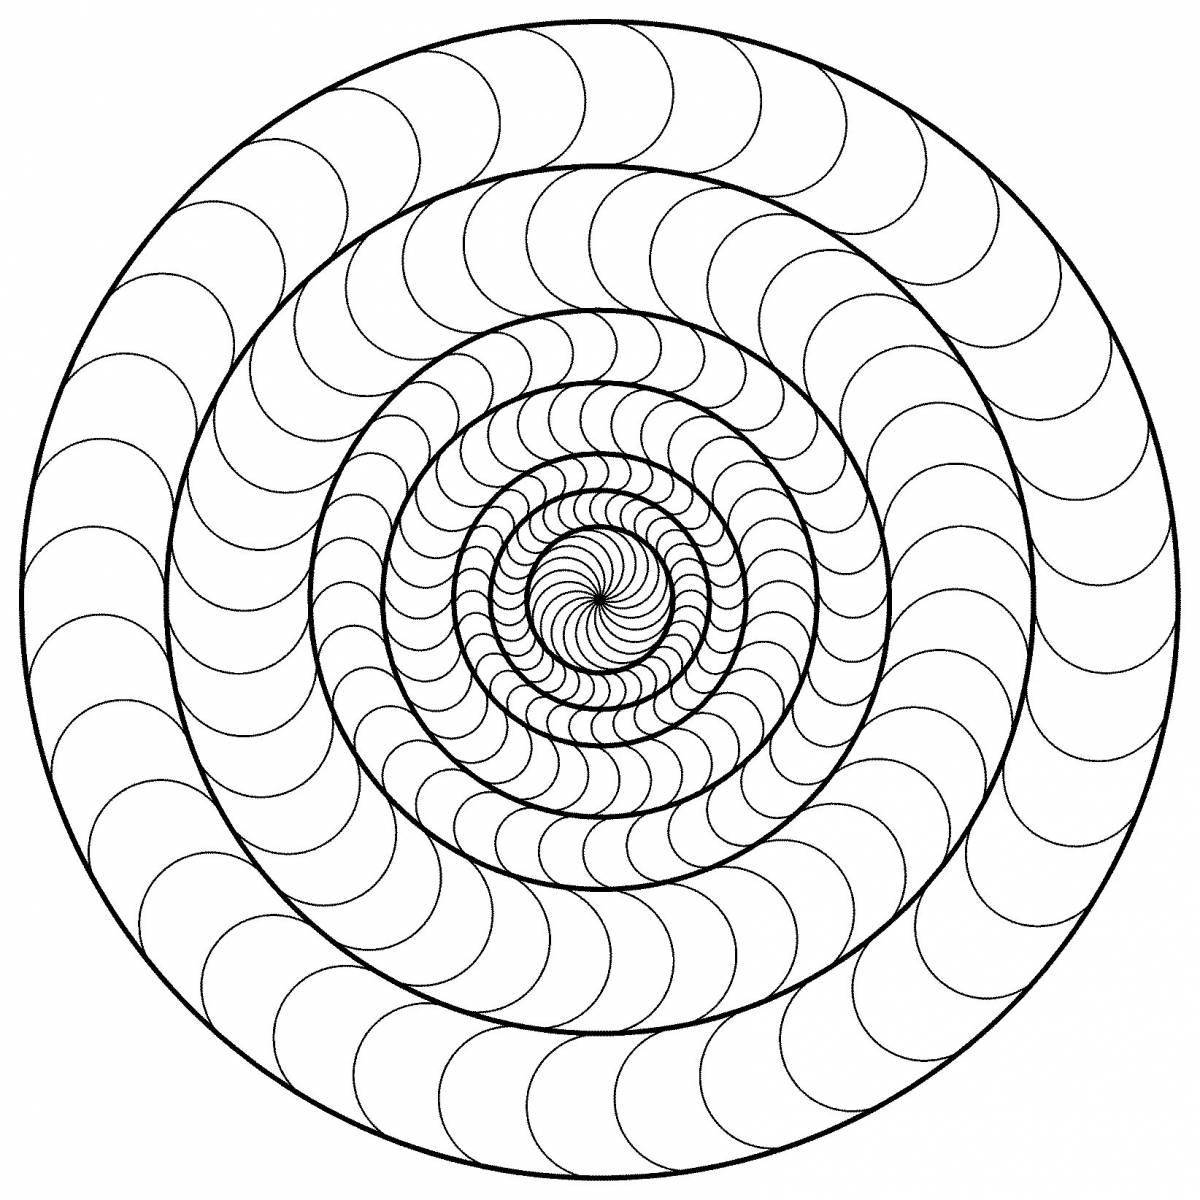 Coloring page bright spiral